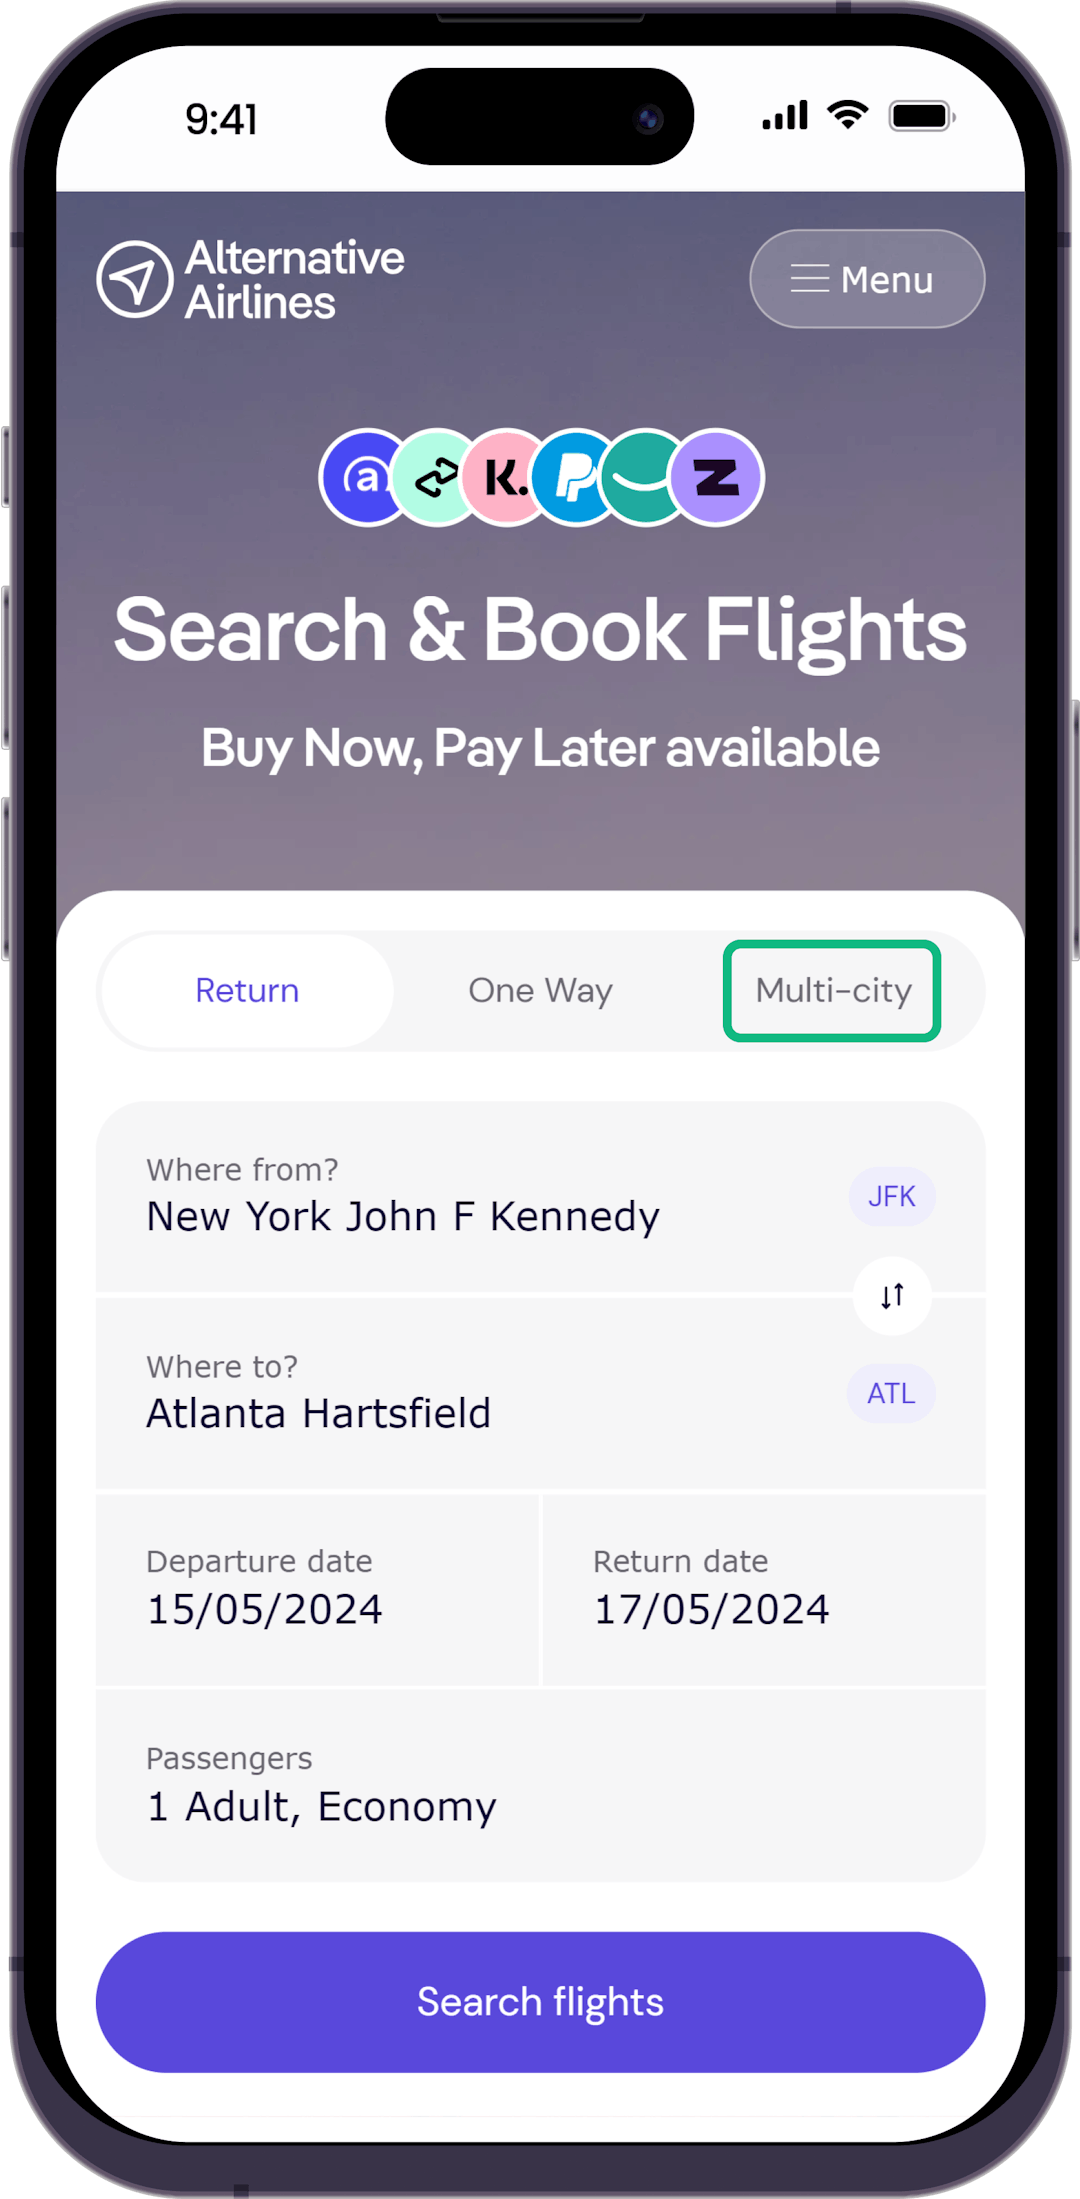 Step 1 - Select multi-city flight option in search form